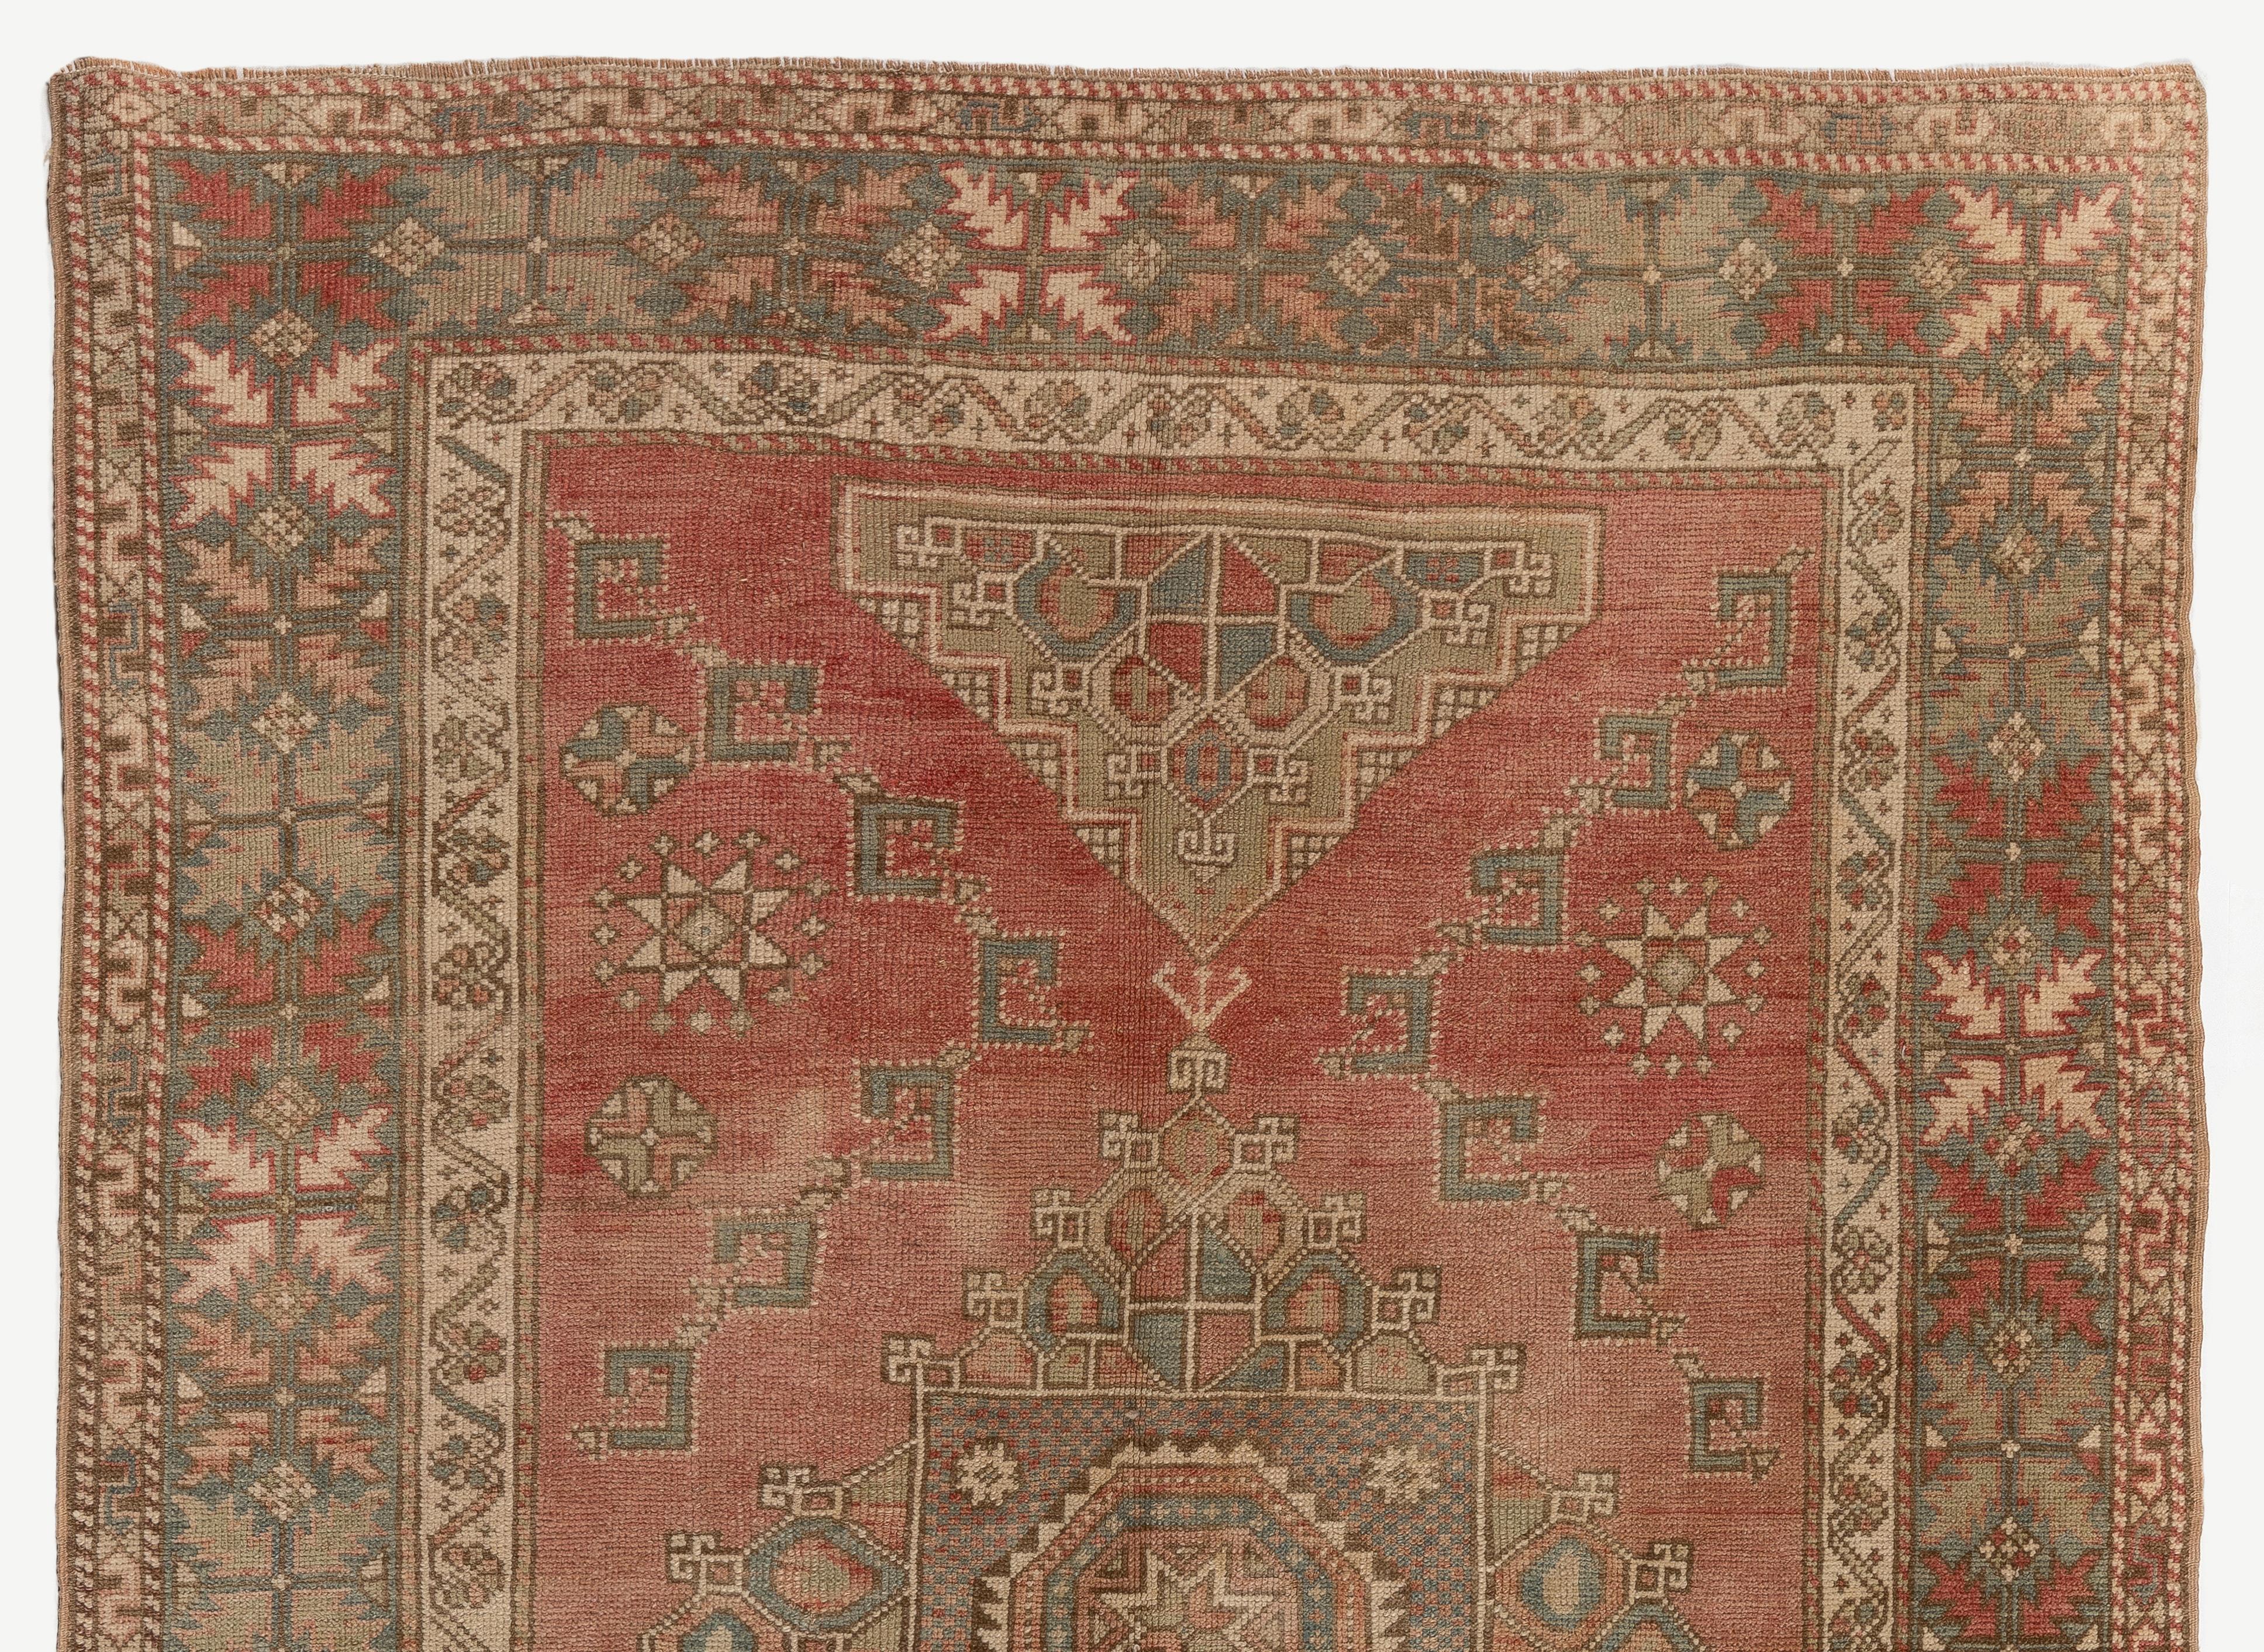 An antique Turkish rug from West Anatolia. Measures: 5.2 x 7.5 ft
100% wool. Soft, medium pile.
Sturdy and can be used on a high traffic area, suitable for both residential and commercial interiors.
Washed professionally.

